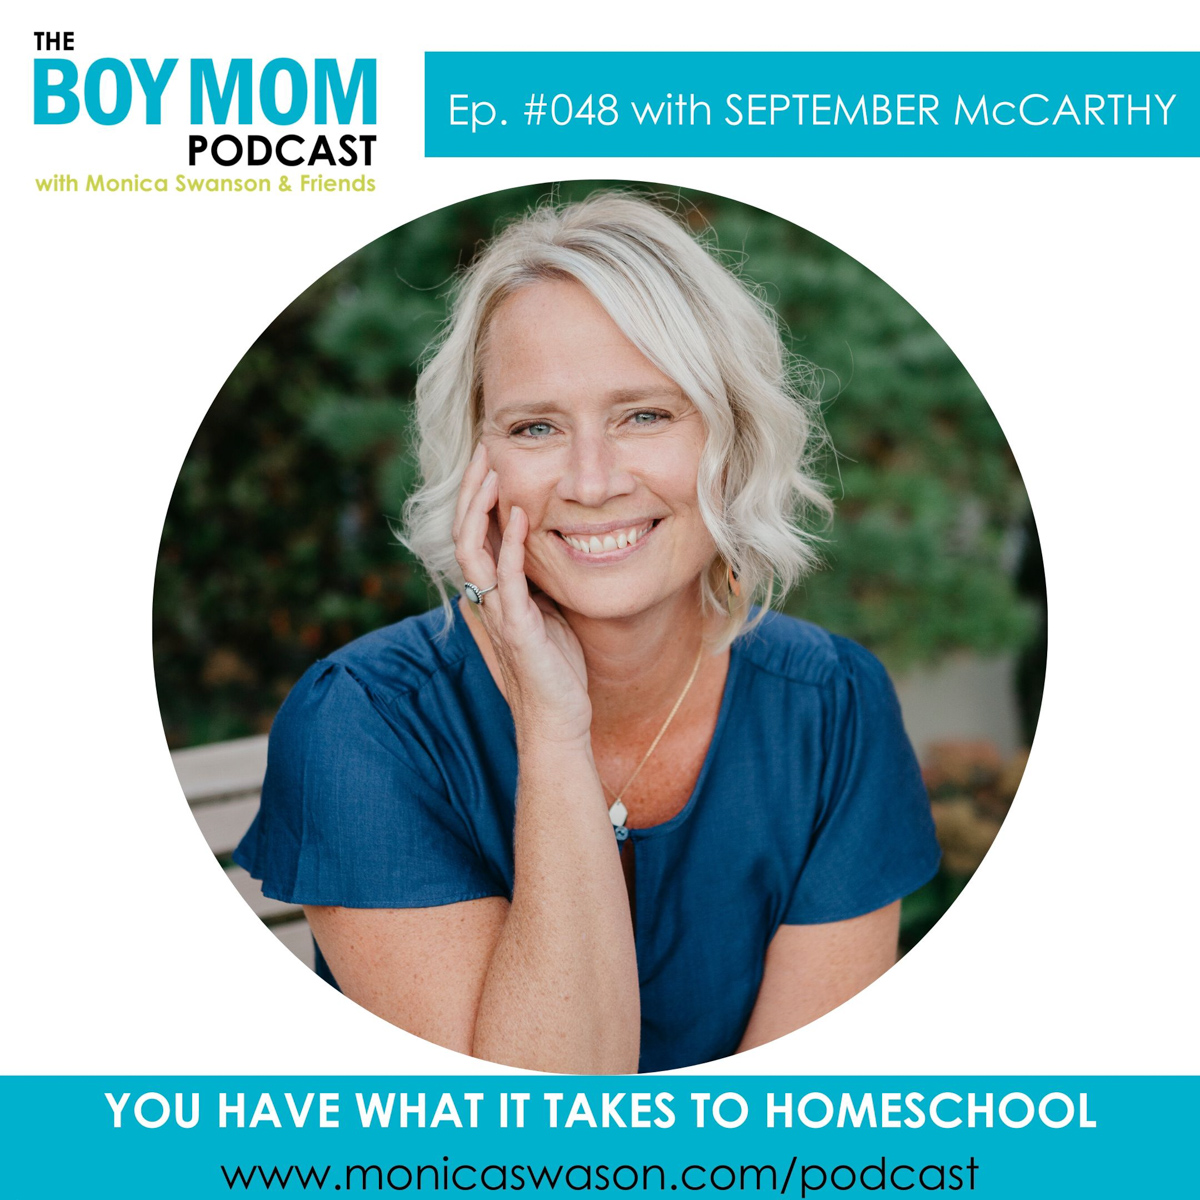 You Have What it Takes to Homeschool {Episode 048 with September McCarthy}